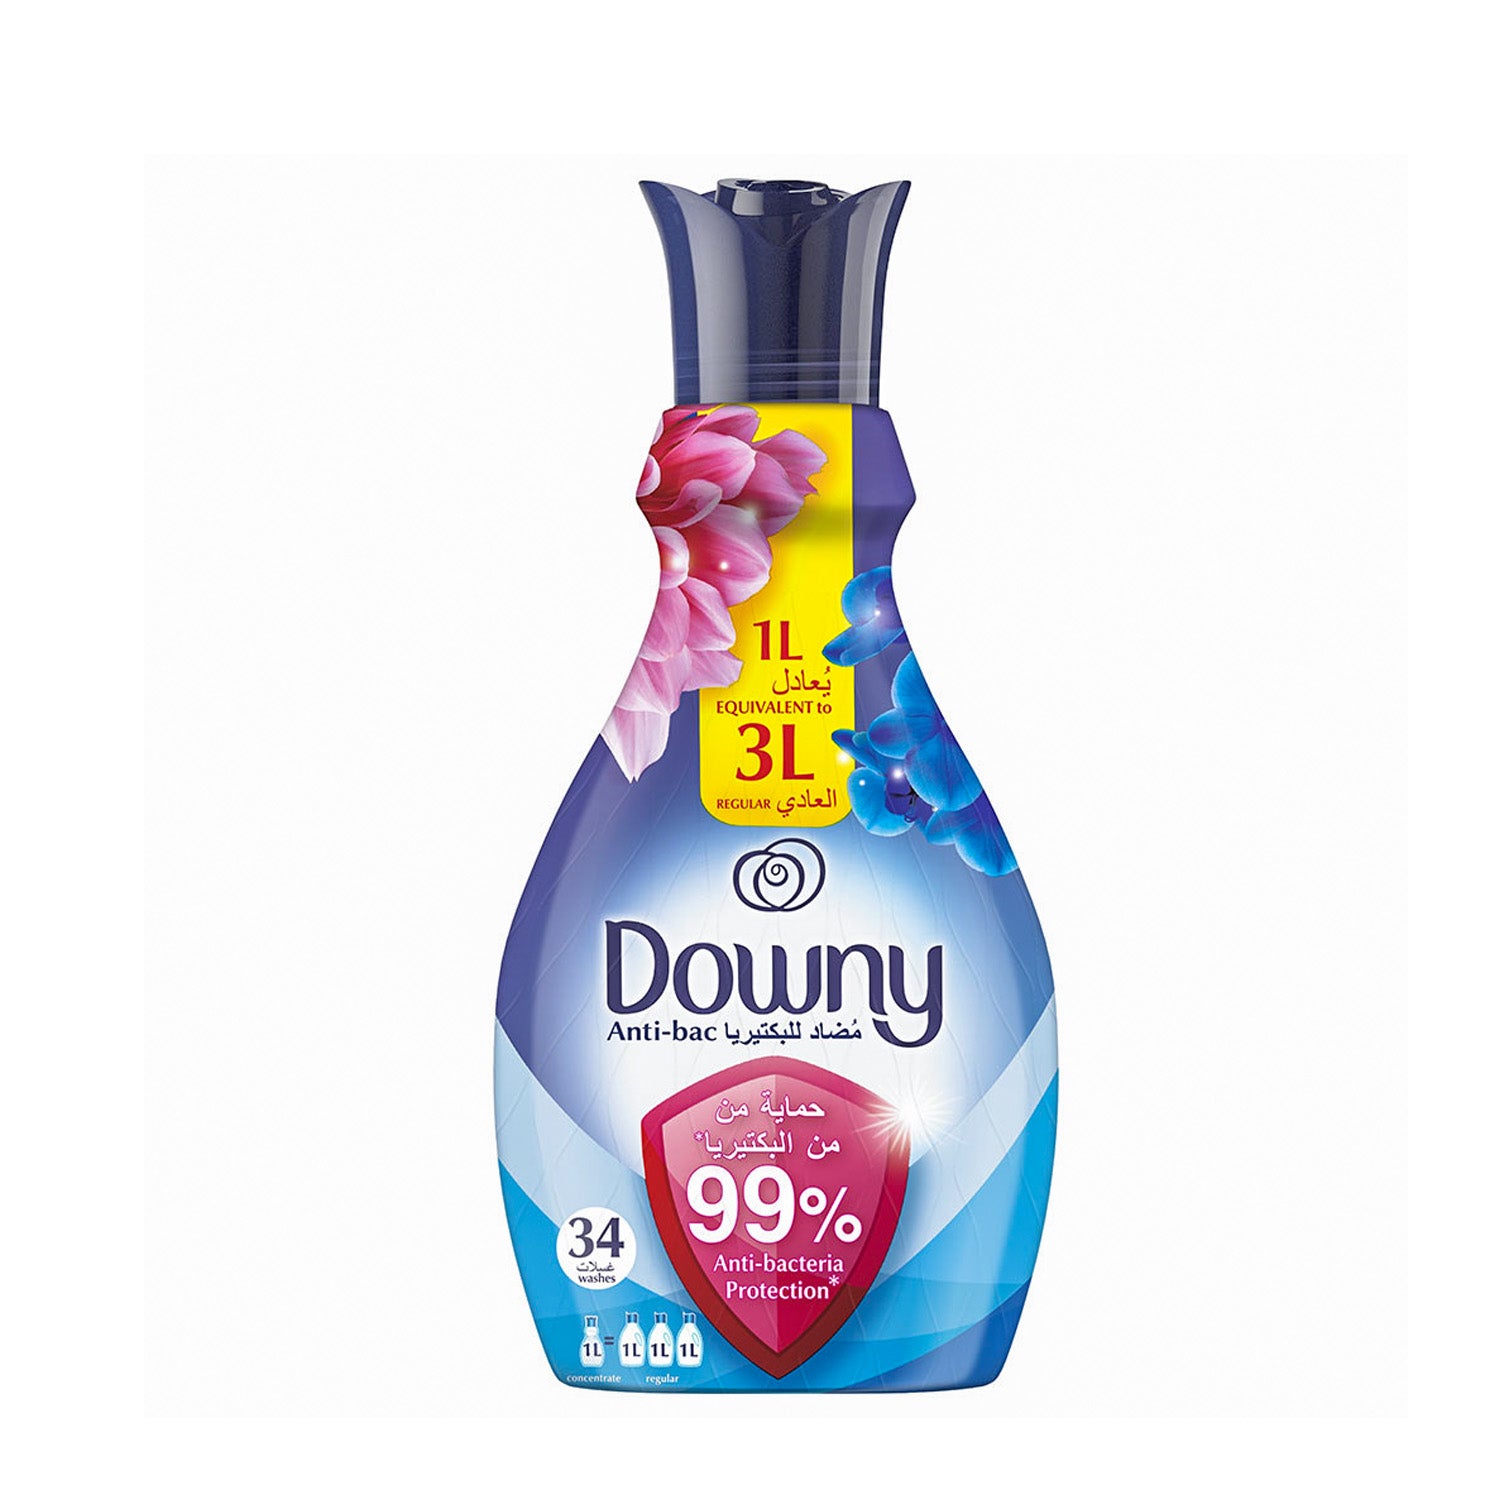 Downy Concentrate Antibac 1.38Ltr